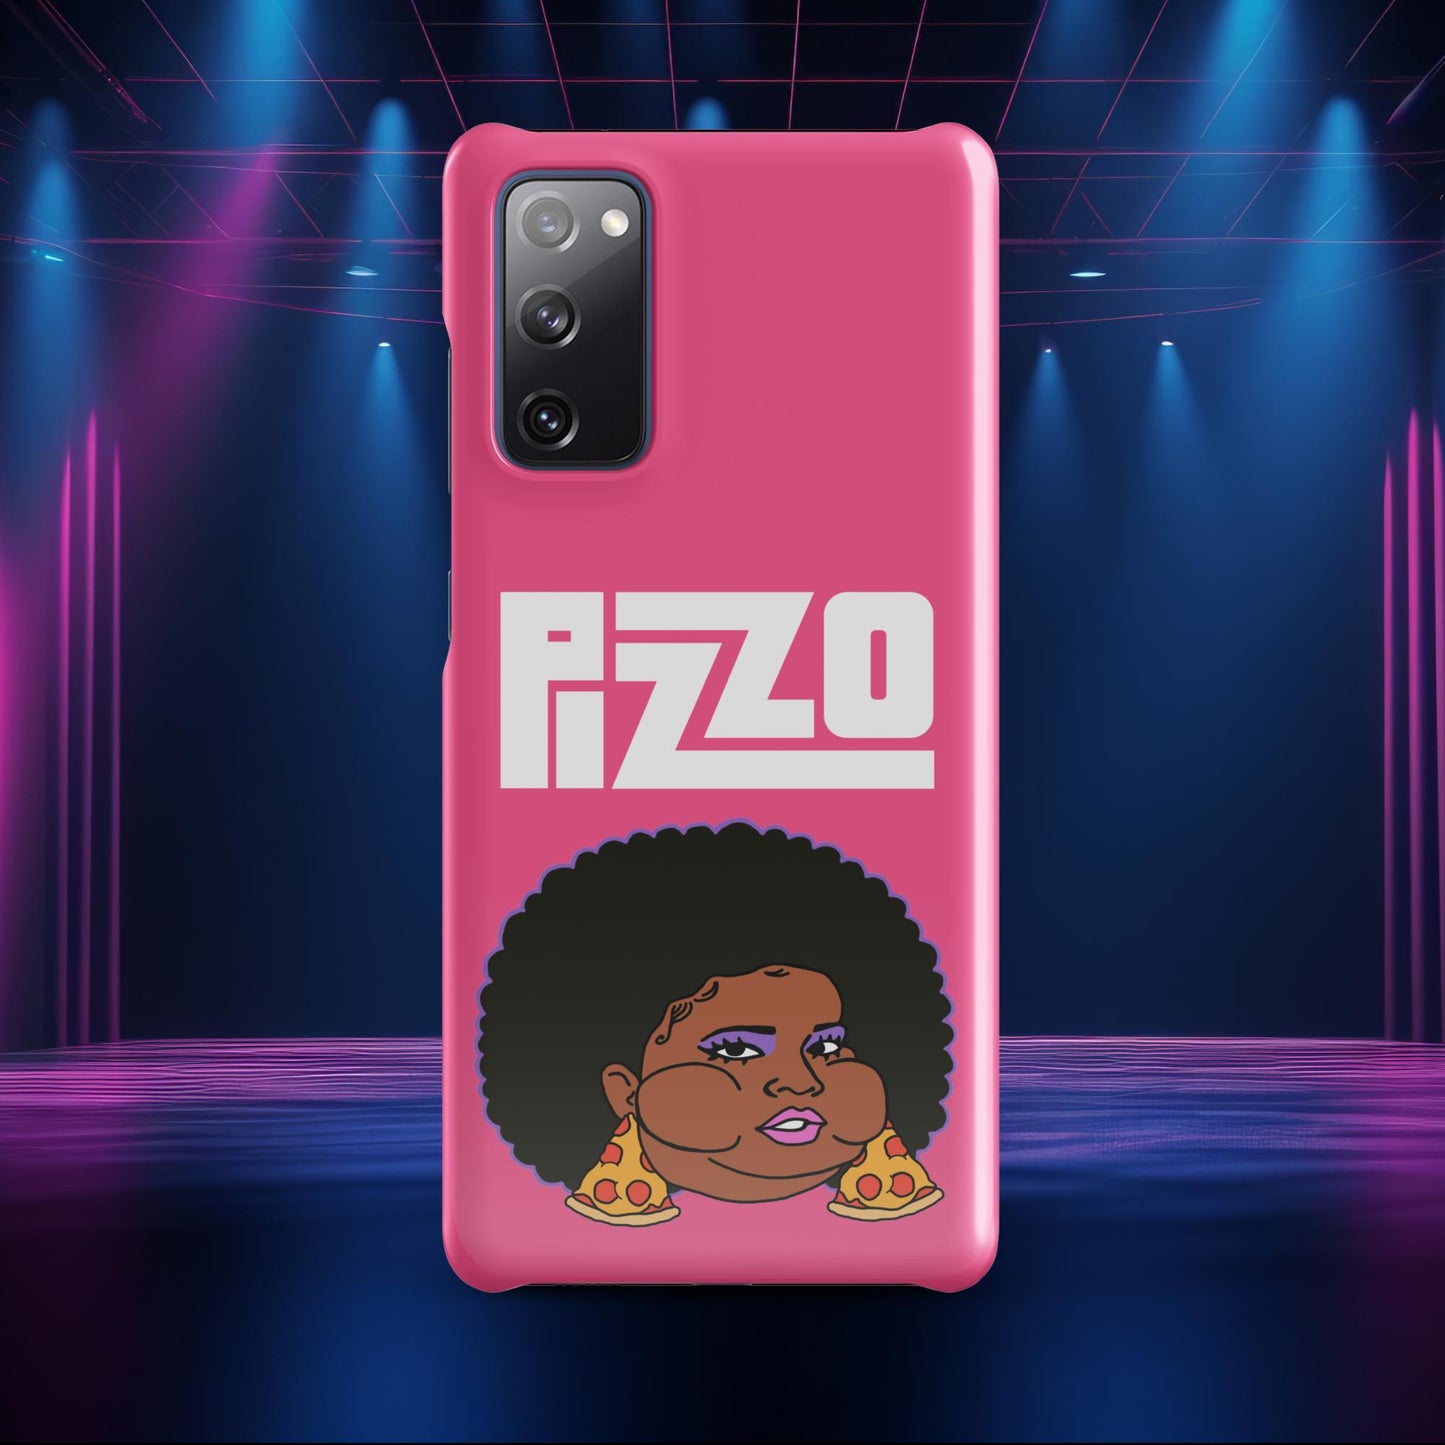 Pizzo Lizzo Pizza Lizzo Merch Lizzo Gift Song Lyrics Lizzo Snap case for Samsung Next Cult Brand